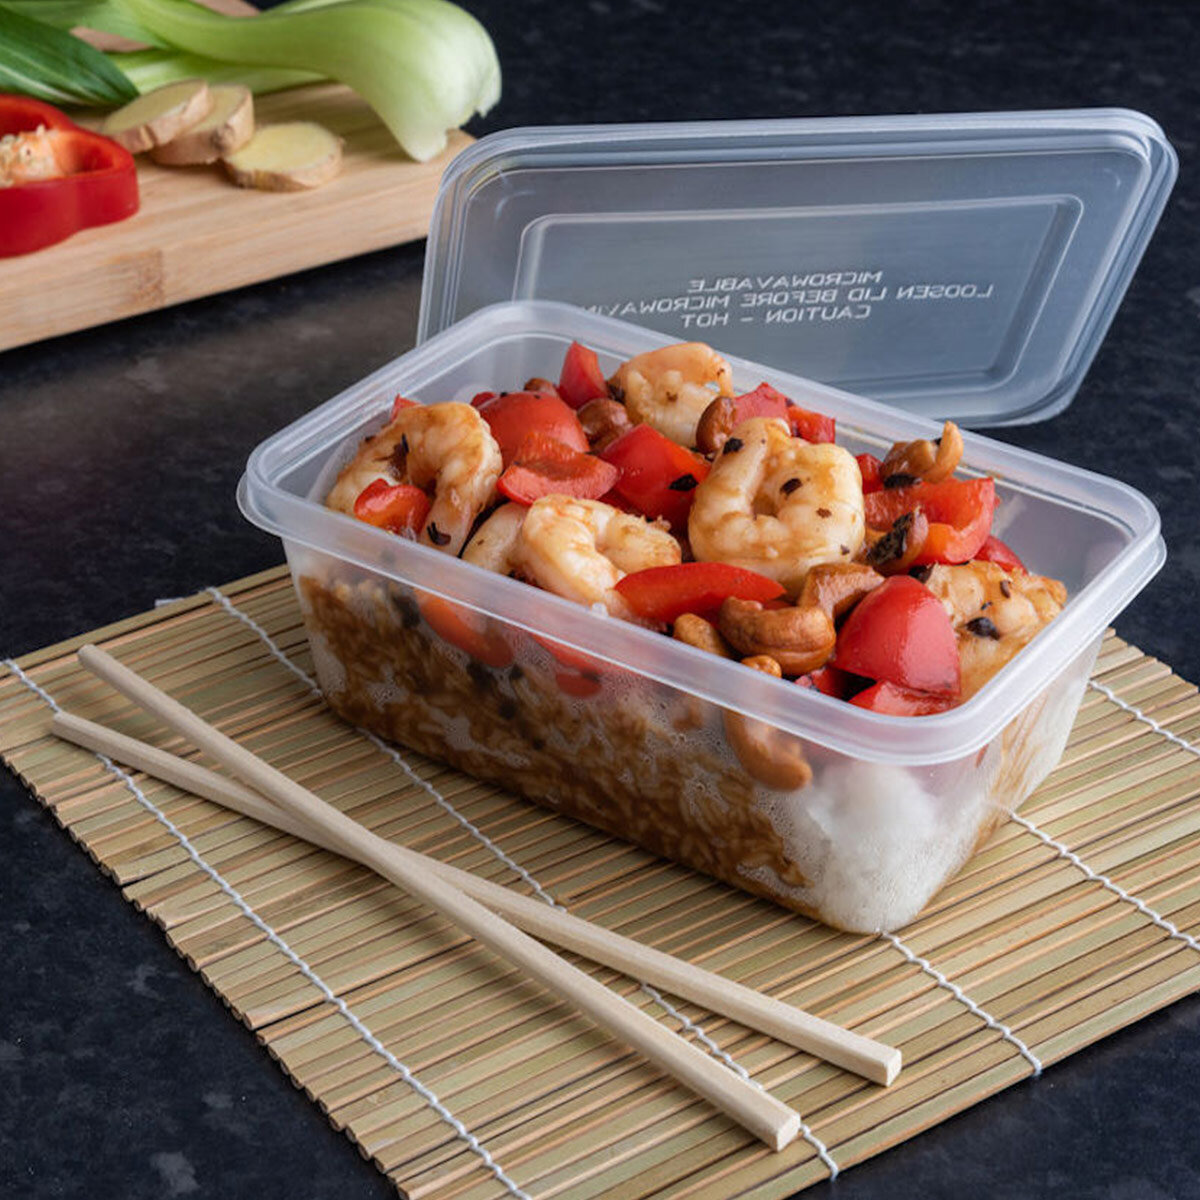 650ml clear plastic container  Plastic takeaway food containers